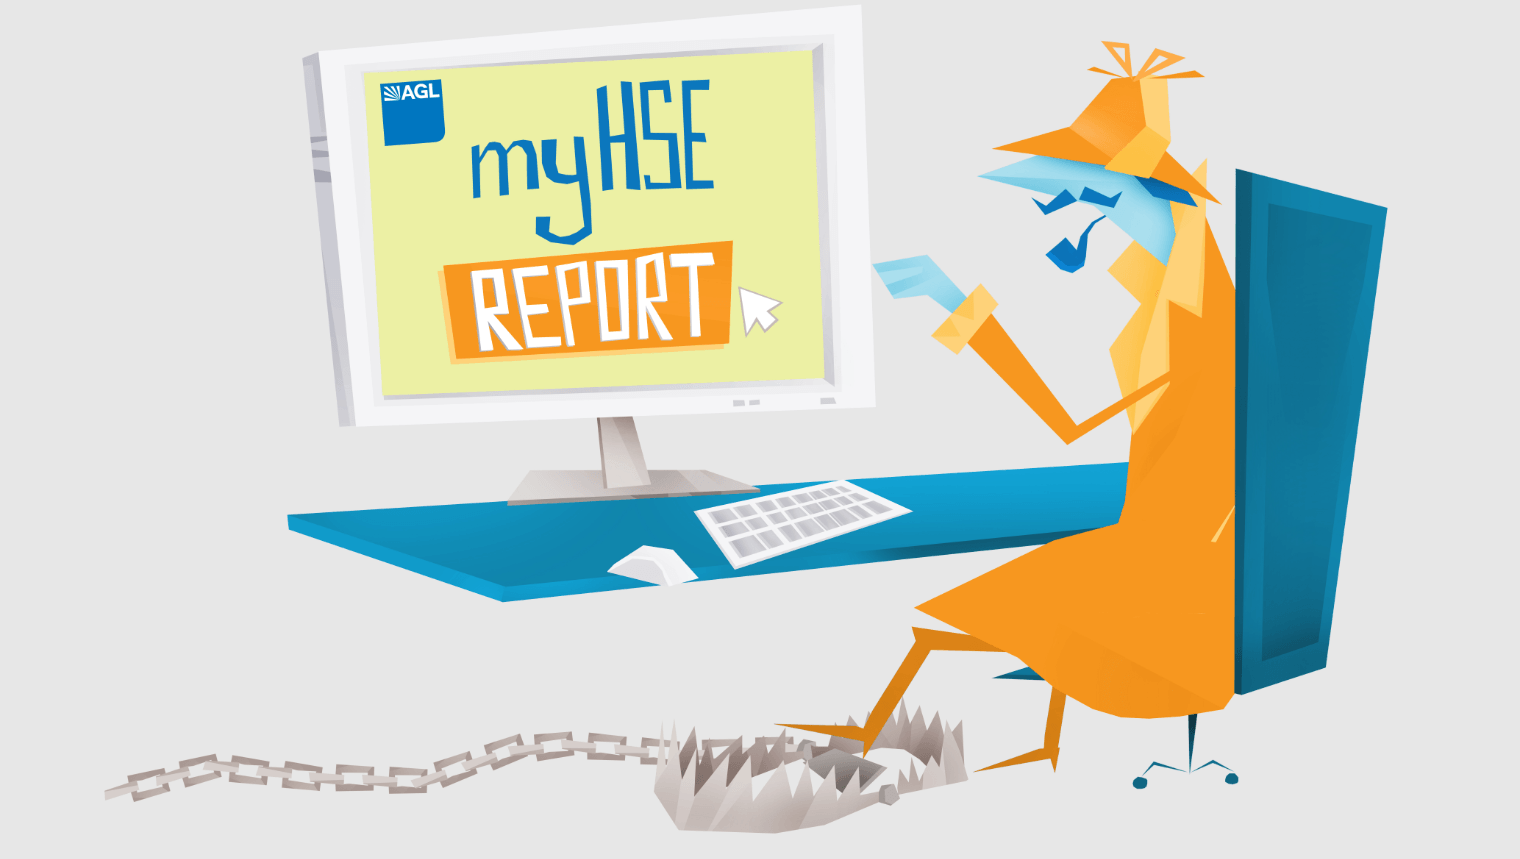 An illustrated character looking at the myHSE report on a computer